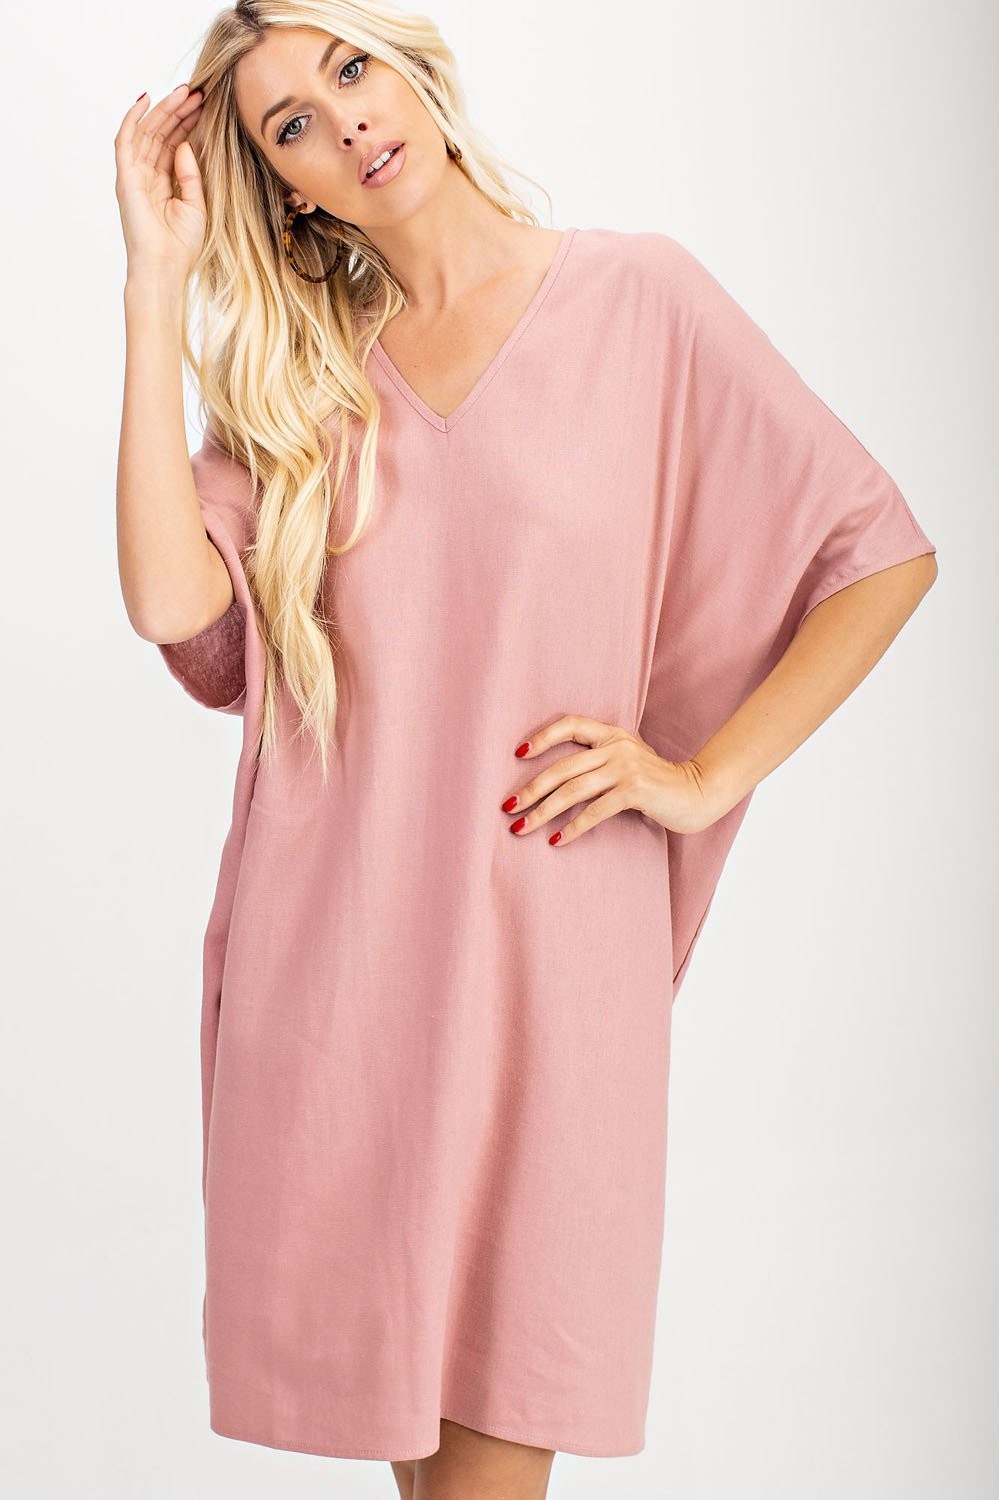 V Neck
Poncho Style Dress with Drawstring
Detailing on the back
Loose Fit - Easy to Pullover Dress
Made in the U.S.A